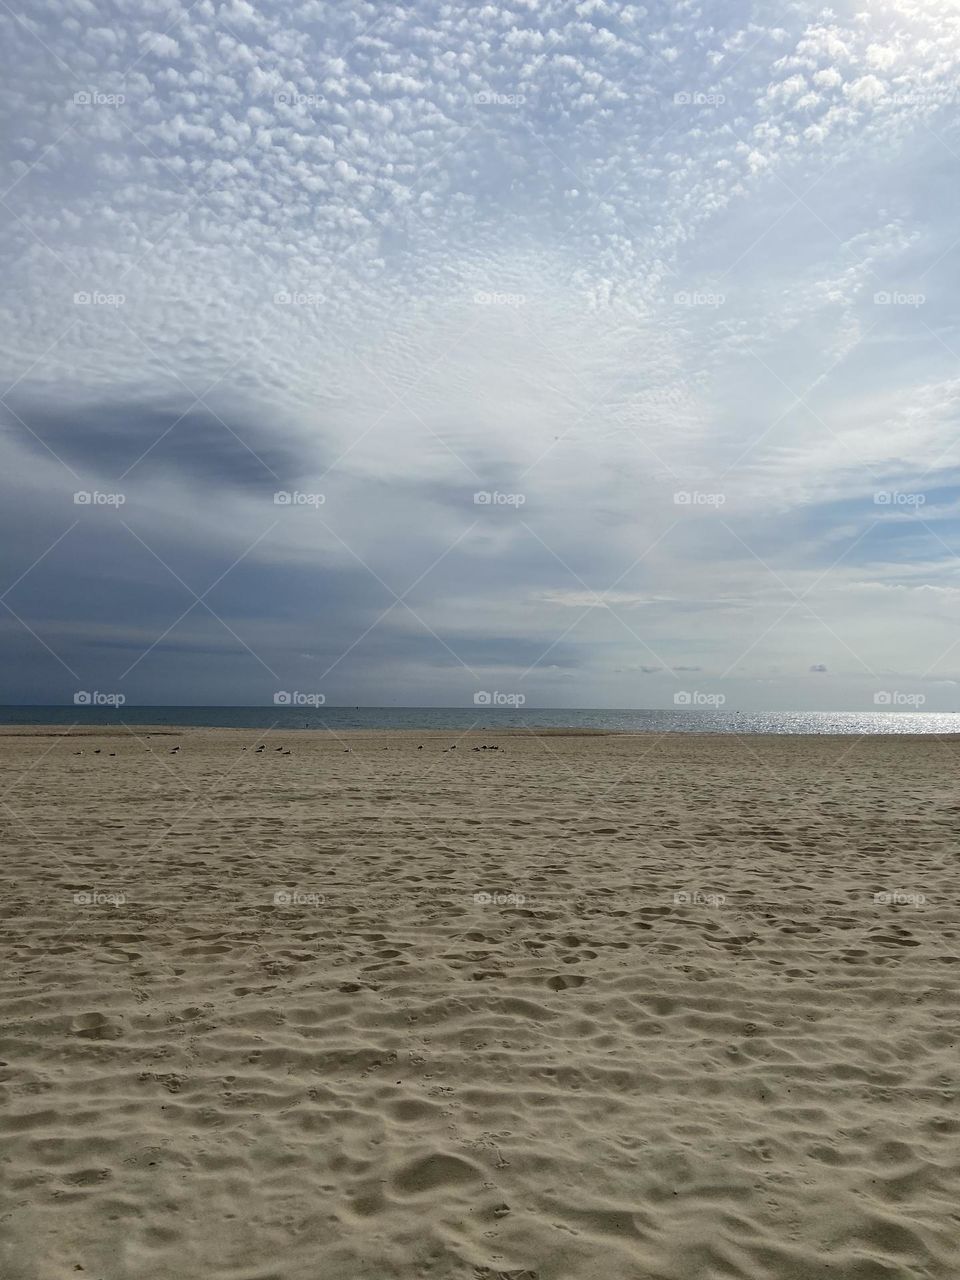 A cloud-filled sky above a sliver of sparkling blue ocean and a sandy beach marked with footprints from beach-goers past. The beach is pretty deserted on this recent September morning, except for some seagulls. The quiet beauty is breathtaking. 